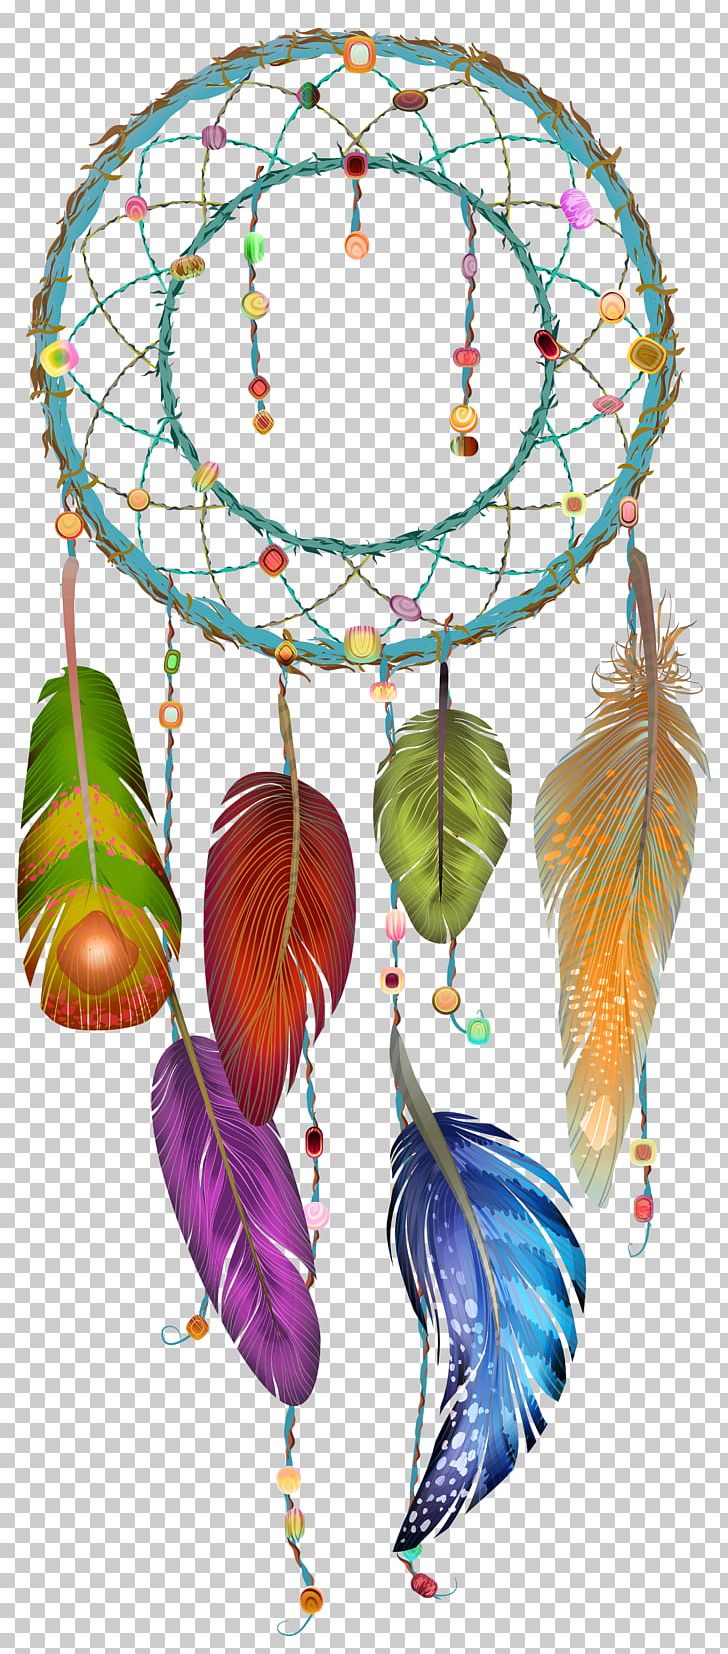 Dreamcatcher Drawing Indigenous Peoples Of The Americas PNG, Clipart, Color, Drawing, Dream, Dreamcatcher, Fantasy Free PNG Download